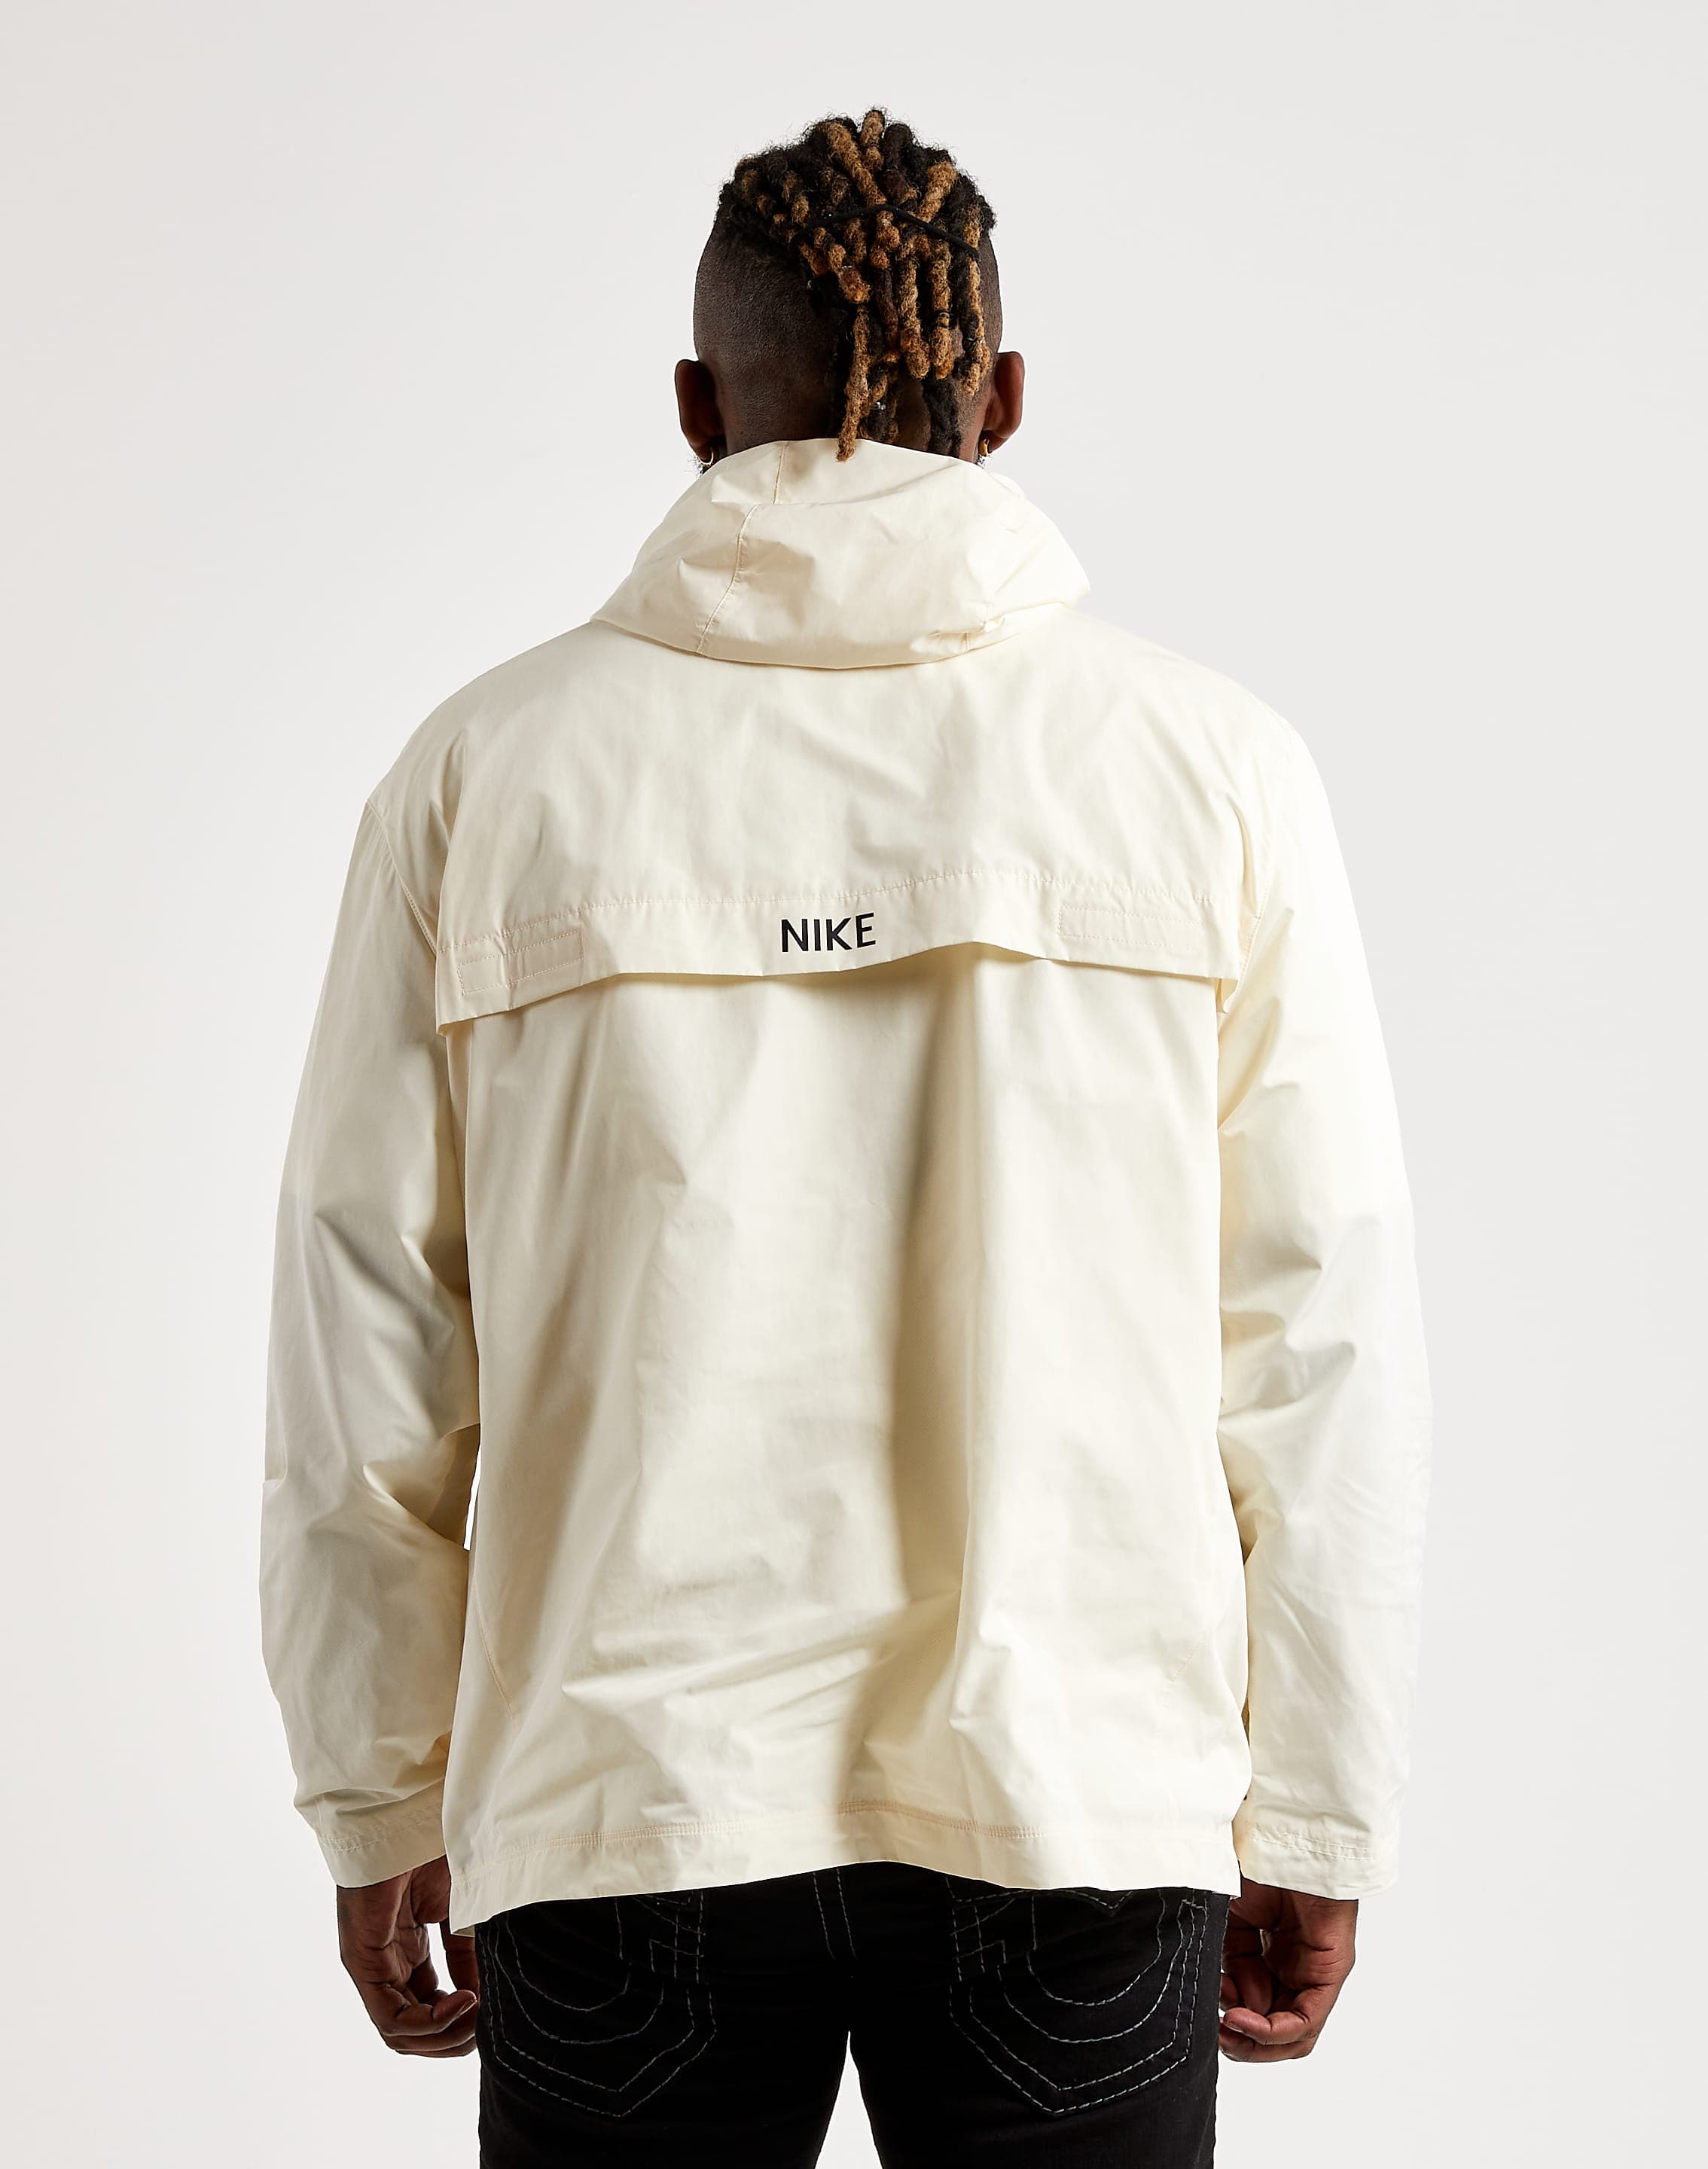 Nike Circa Lined Anorak – DTLR